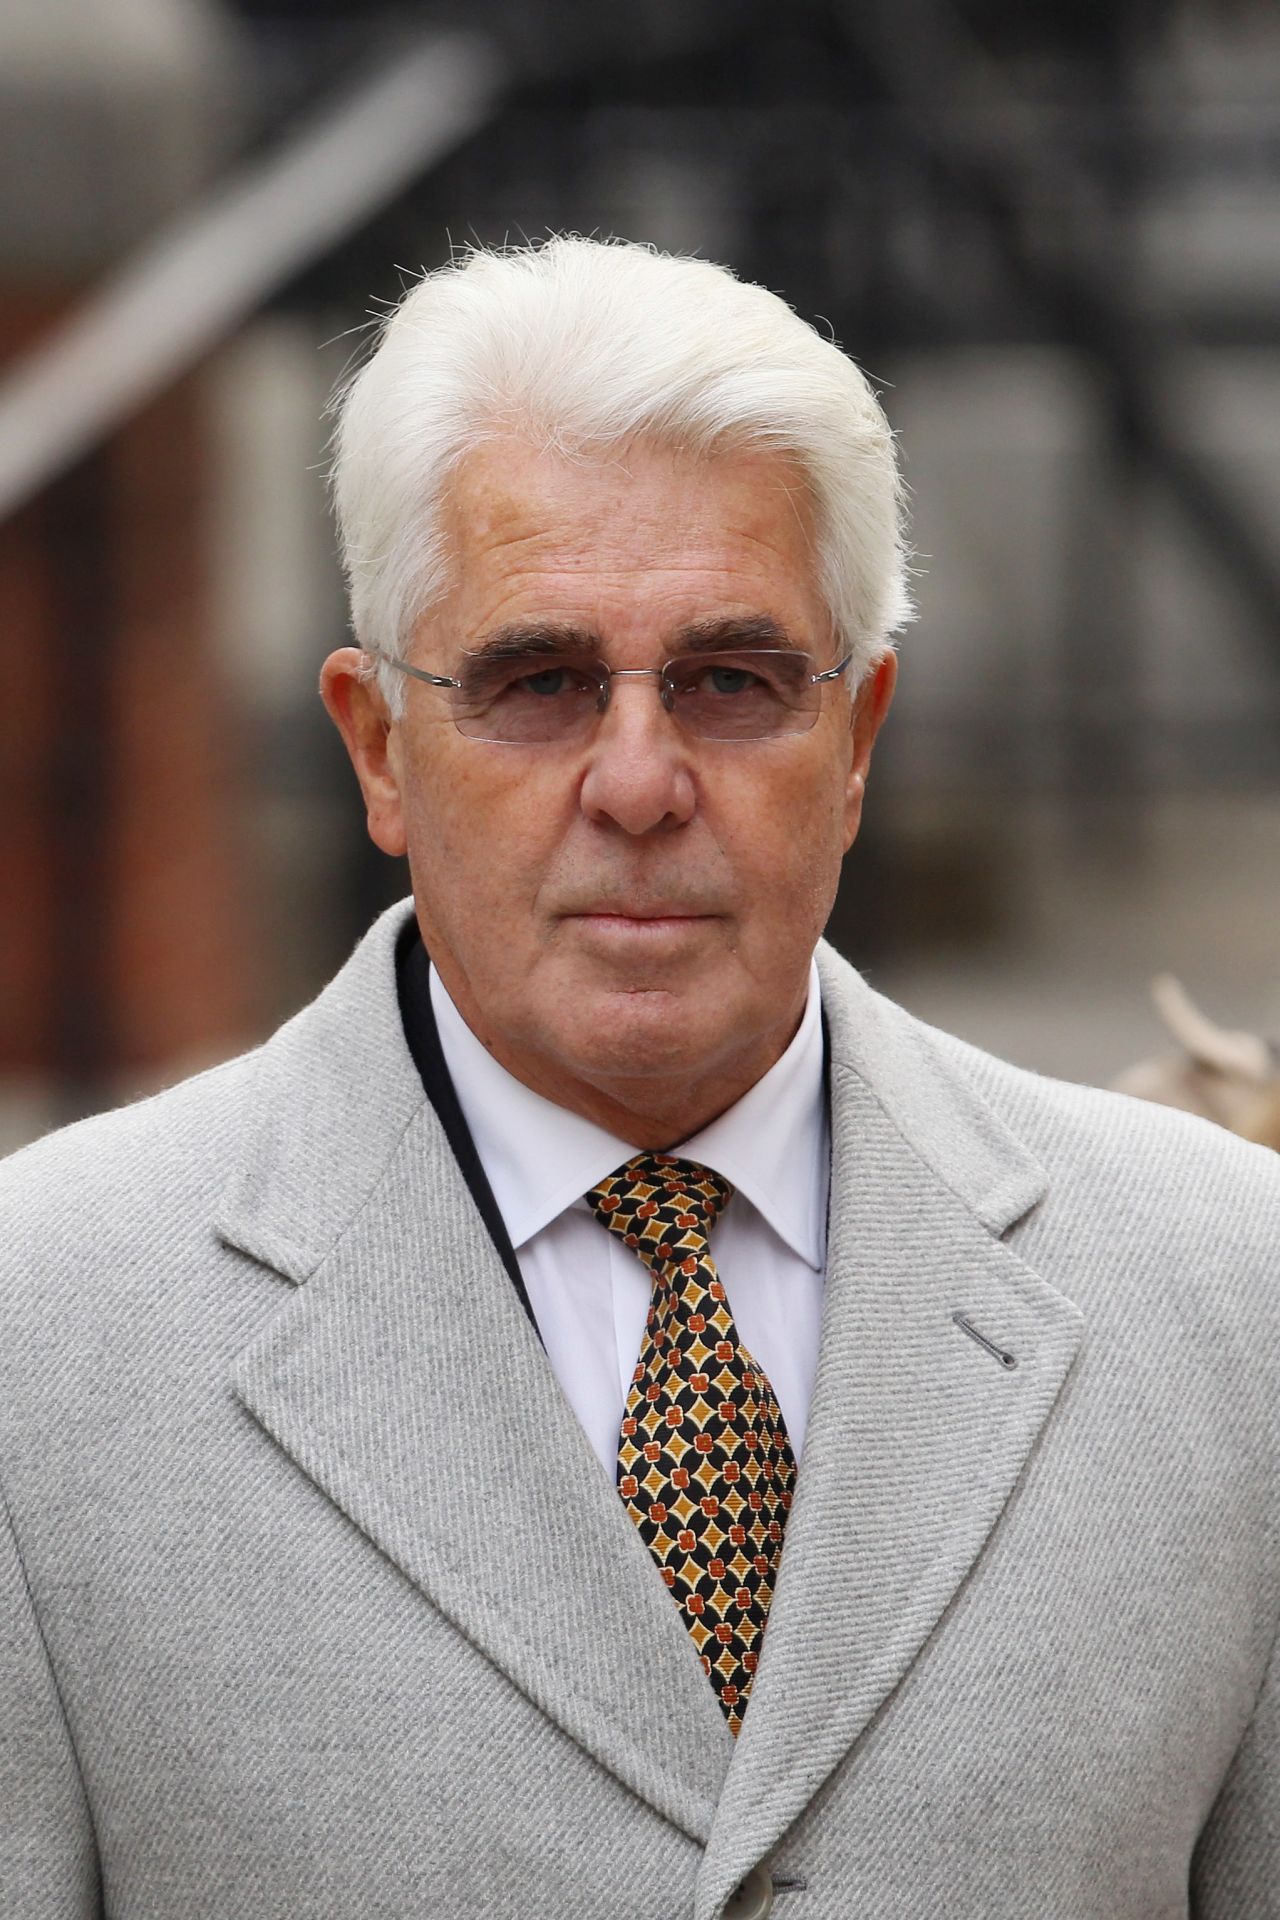 Celebrity public relations agent Max Clifford dropped his lawsuit against the News of the World in March 2010 for a payment of more than 1 million pounds ($1.6 million).